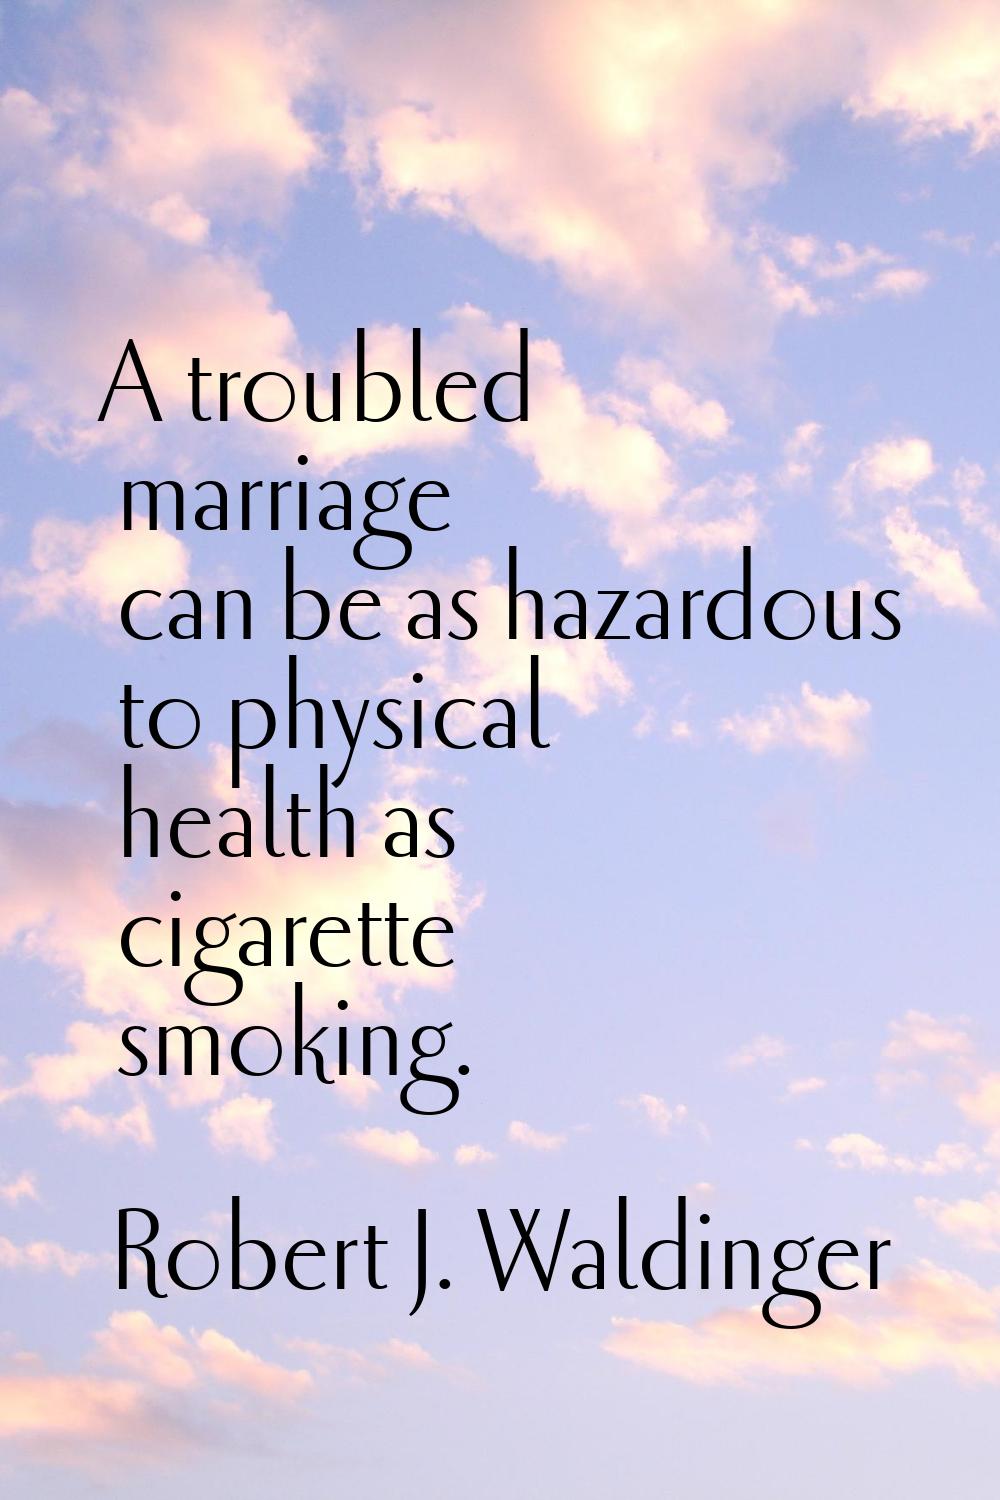 A troubled marriage can be as hazardous to physical health as cigarette smoking.